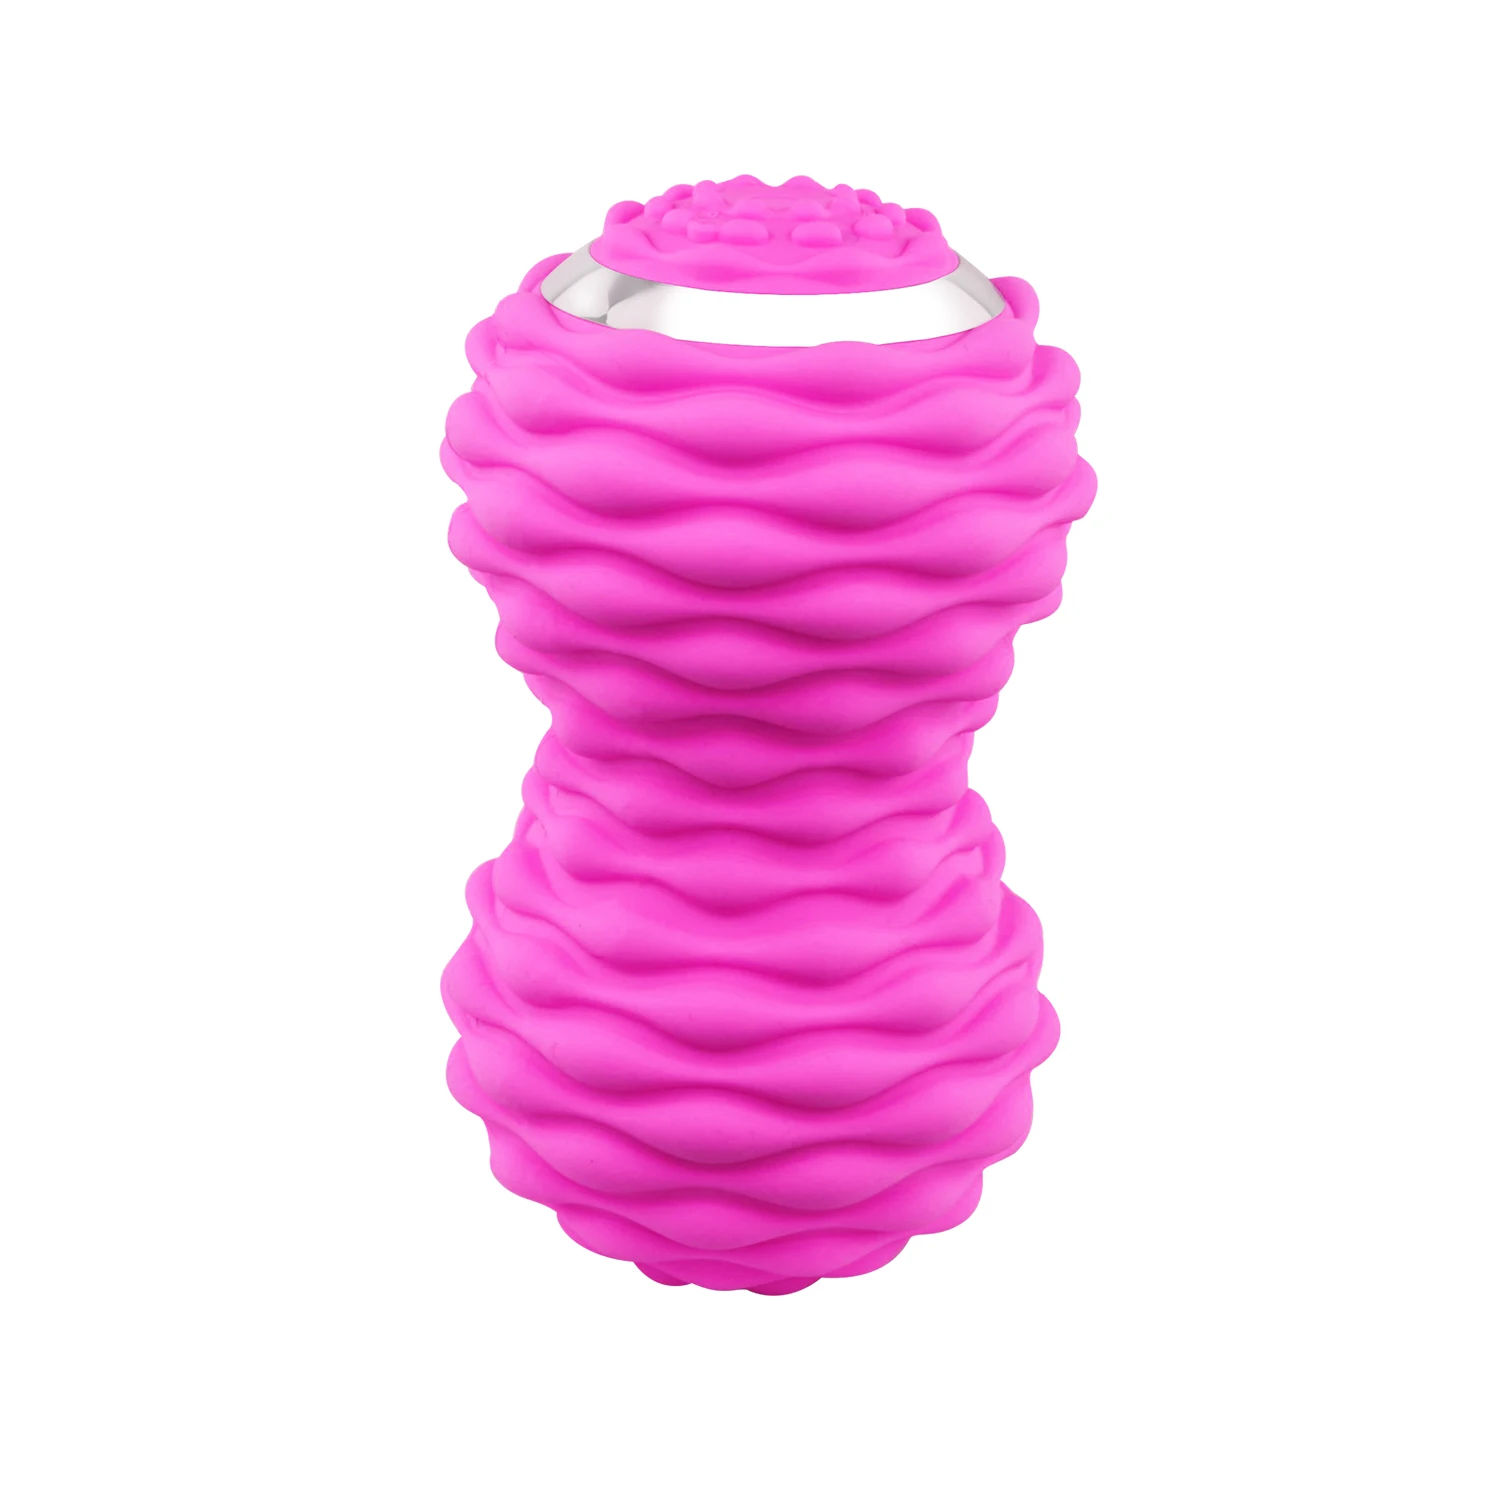 

Electric Peanut Shape Massage Yoga Sport Fitness Ball Durable PVC Stress Relief Body Hand Foot Spiky Massager Point Foot Pain, Customized